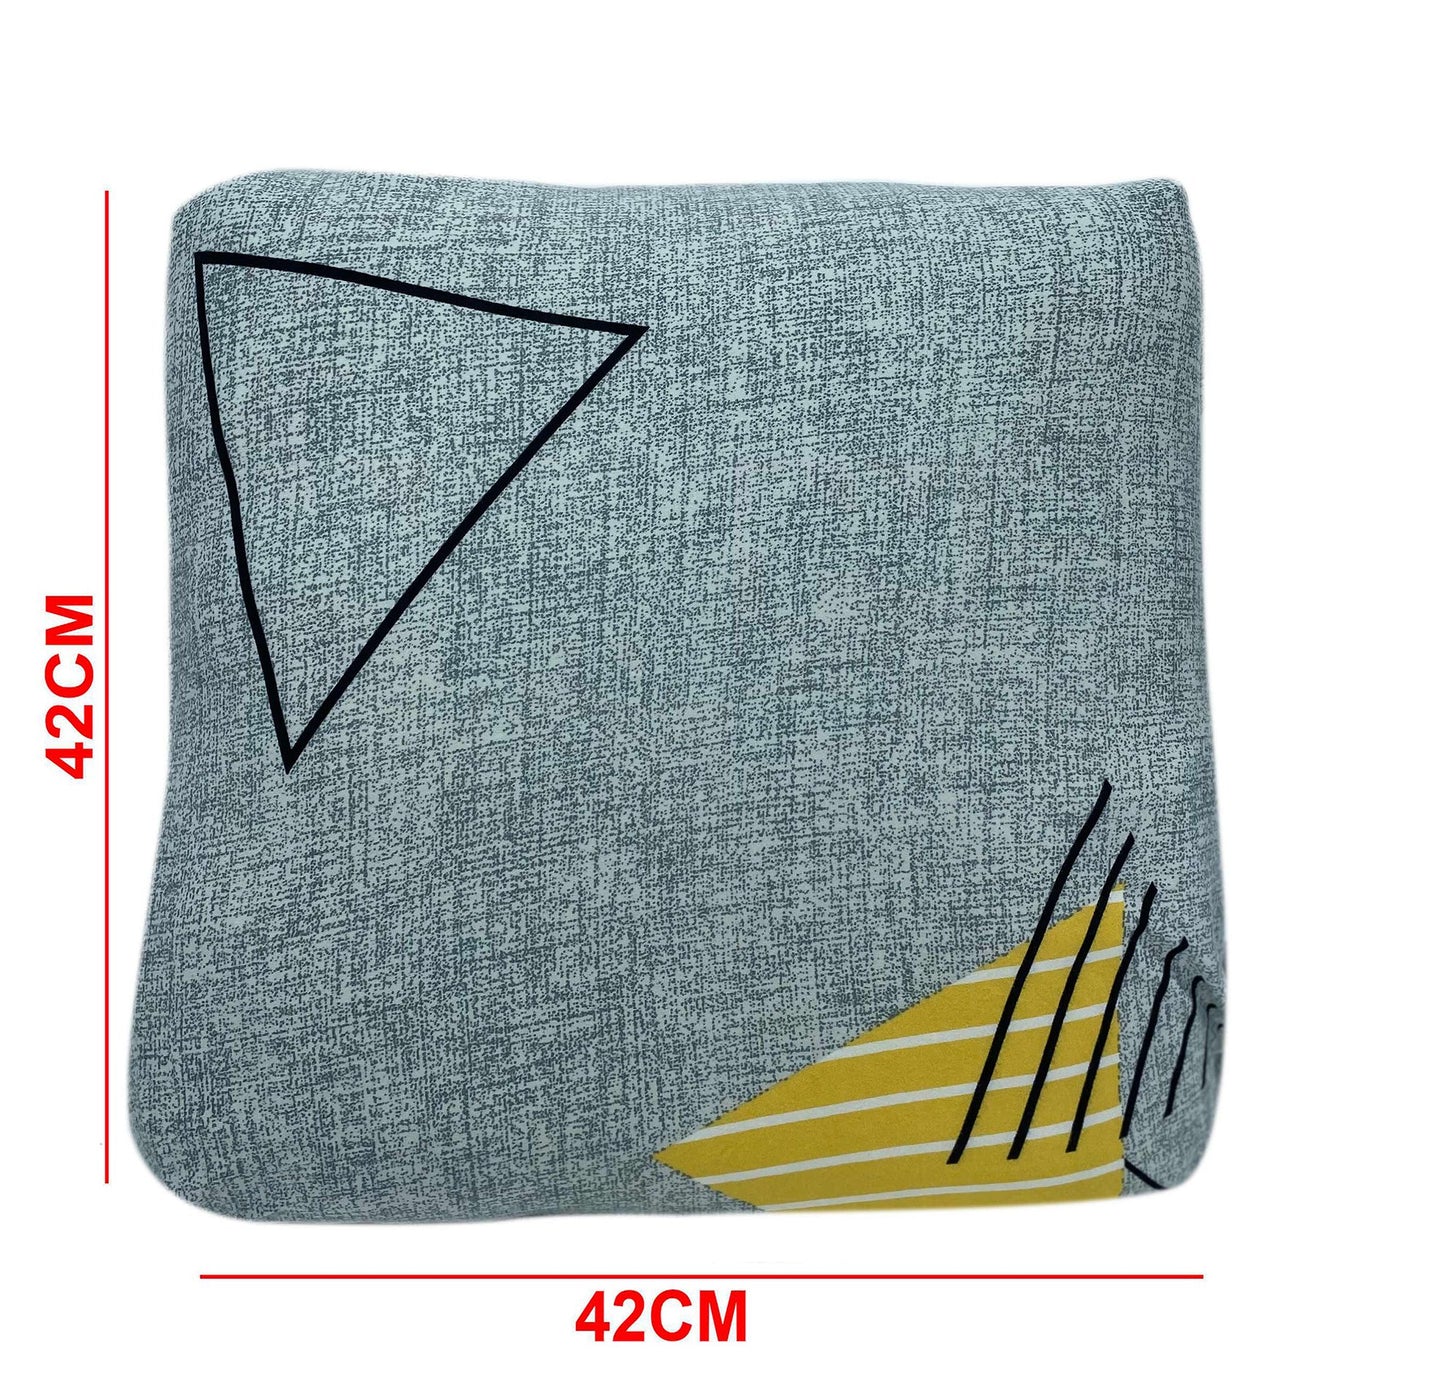 Polyester Cushion Cover